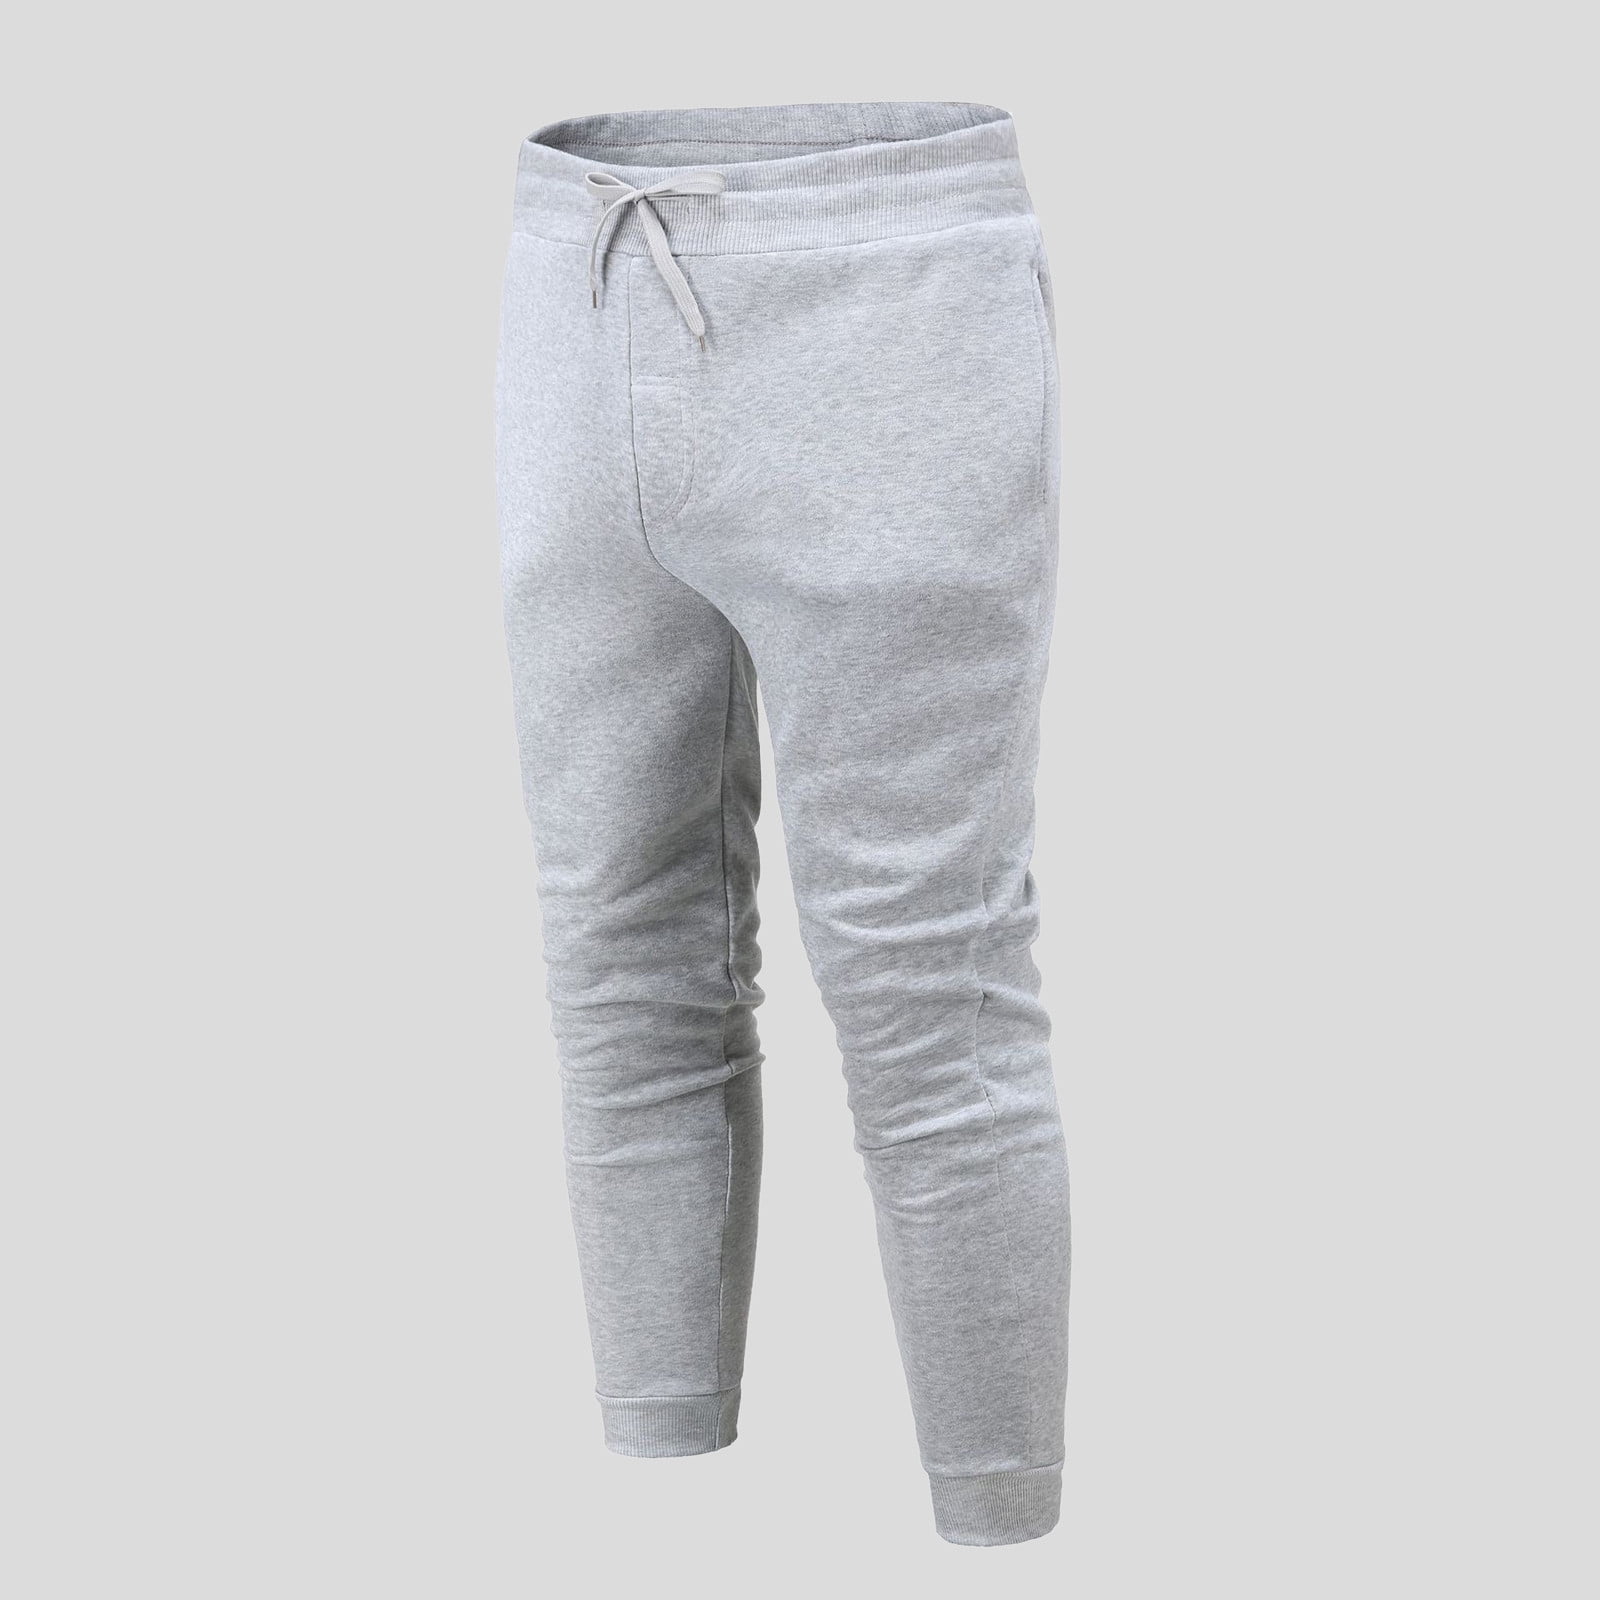 Grey Sweatpants For Men Mens Autumn And Winter High Street Fashion Leisure  Loose Sports Running Solid Color Lace Up Pants Sweater Pants Trousers